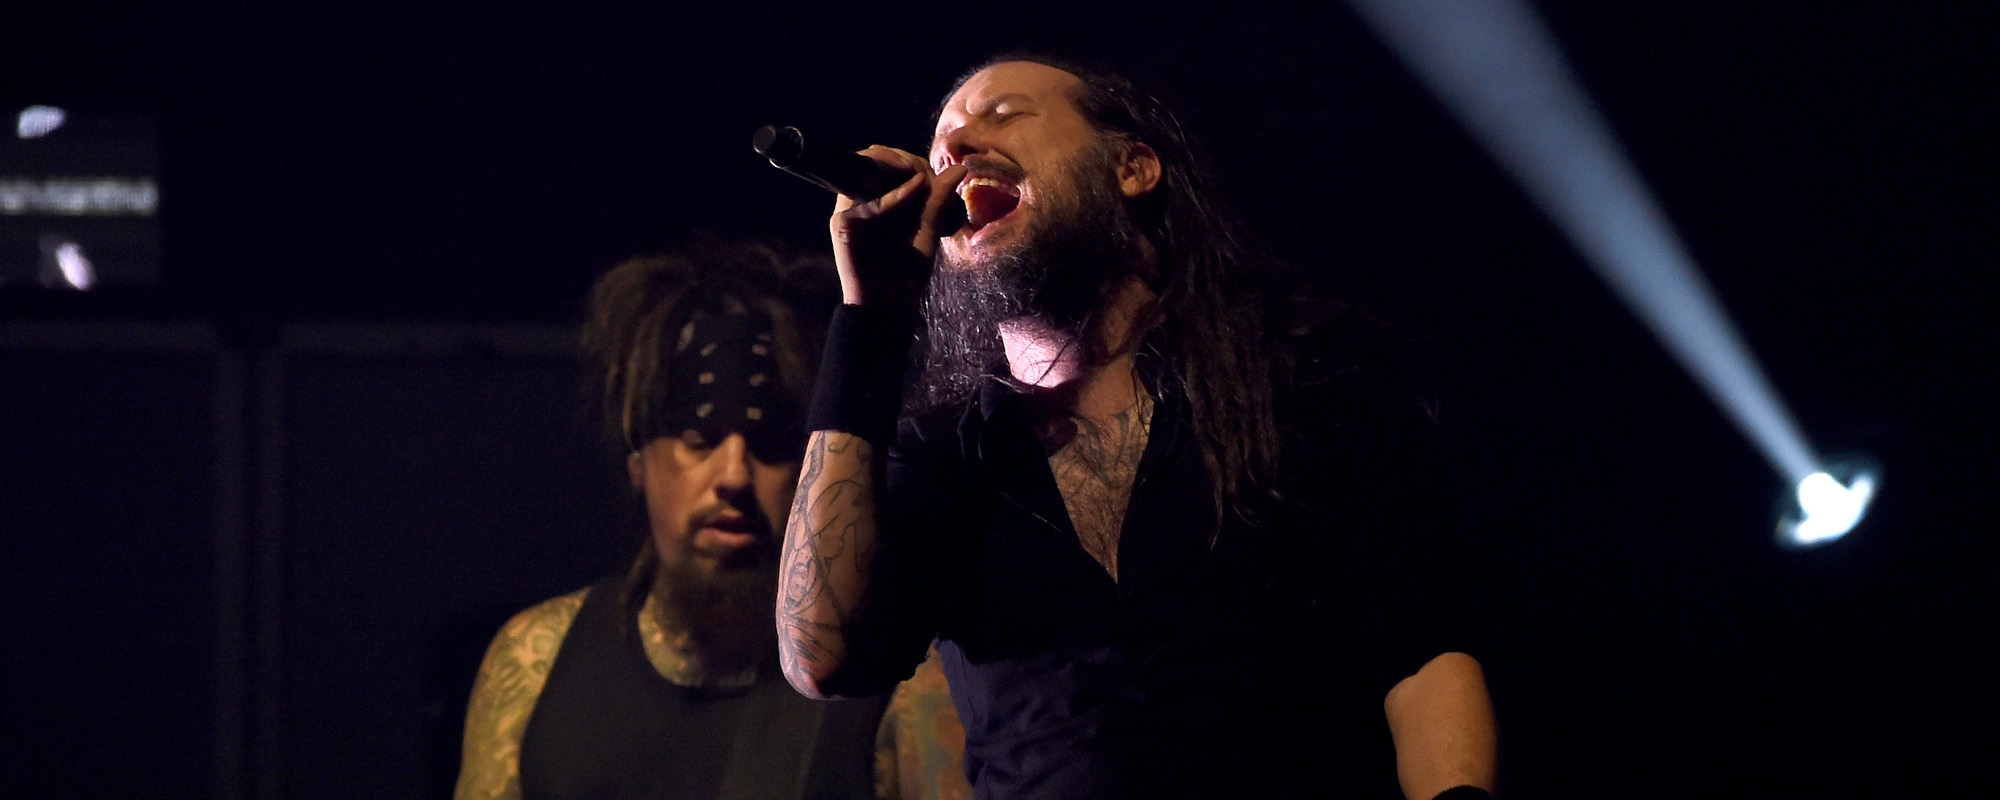 Remember When: Korn Made the Dubstep Album ‘The Path of Totality’